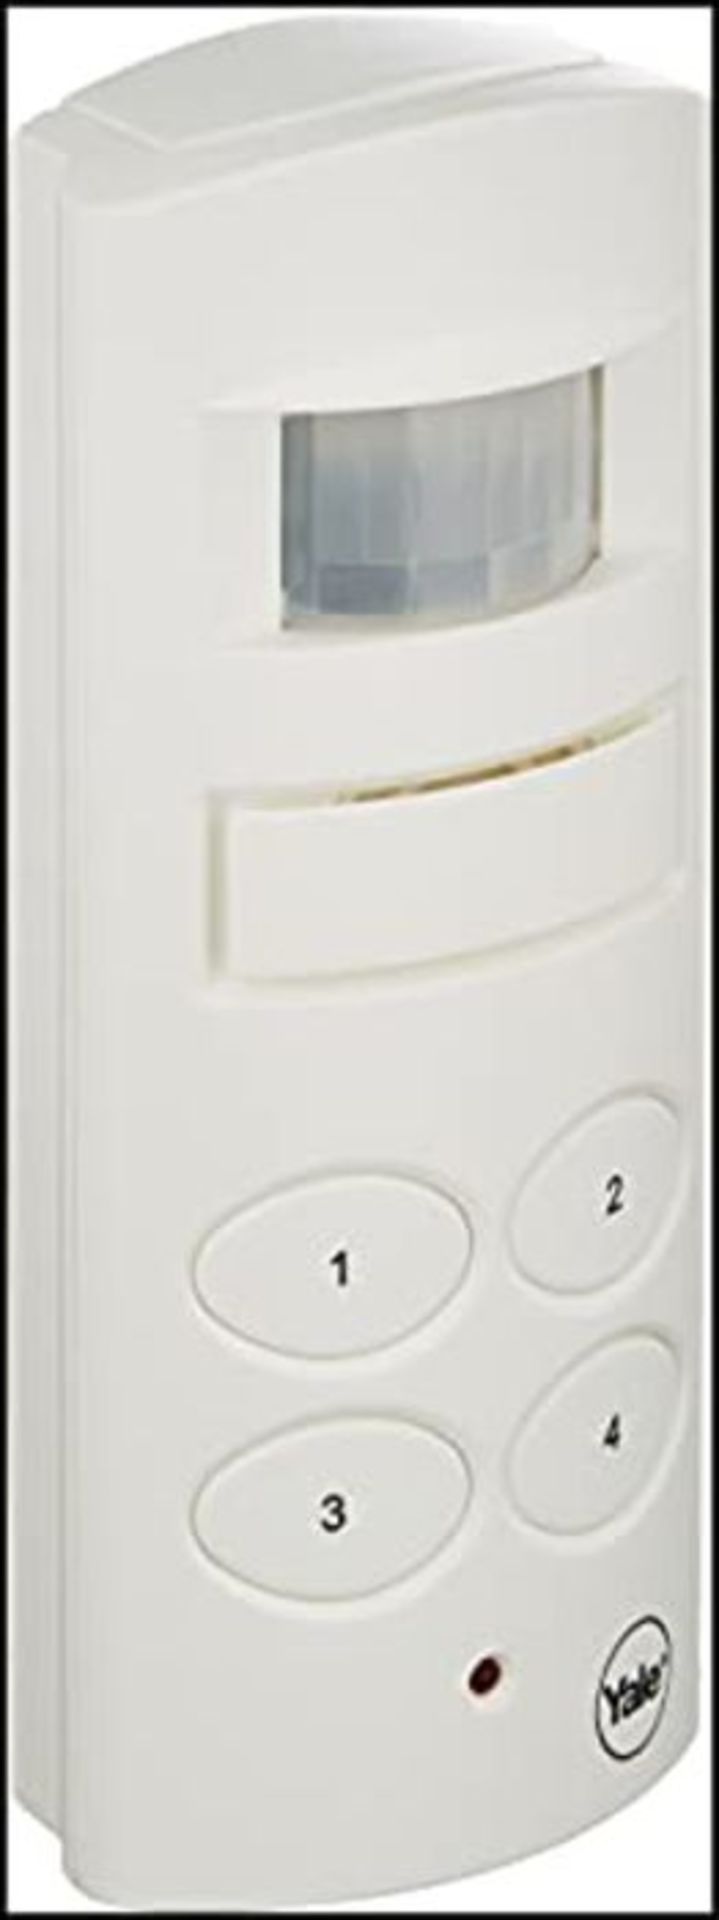 Yale SAA5015 Wireless Shed and Garage Alarm, Free-Standing or Wall-Mounted, 4 Digit Pi